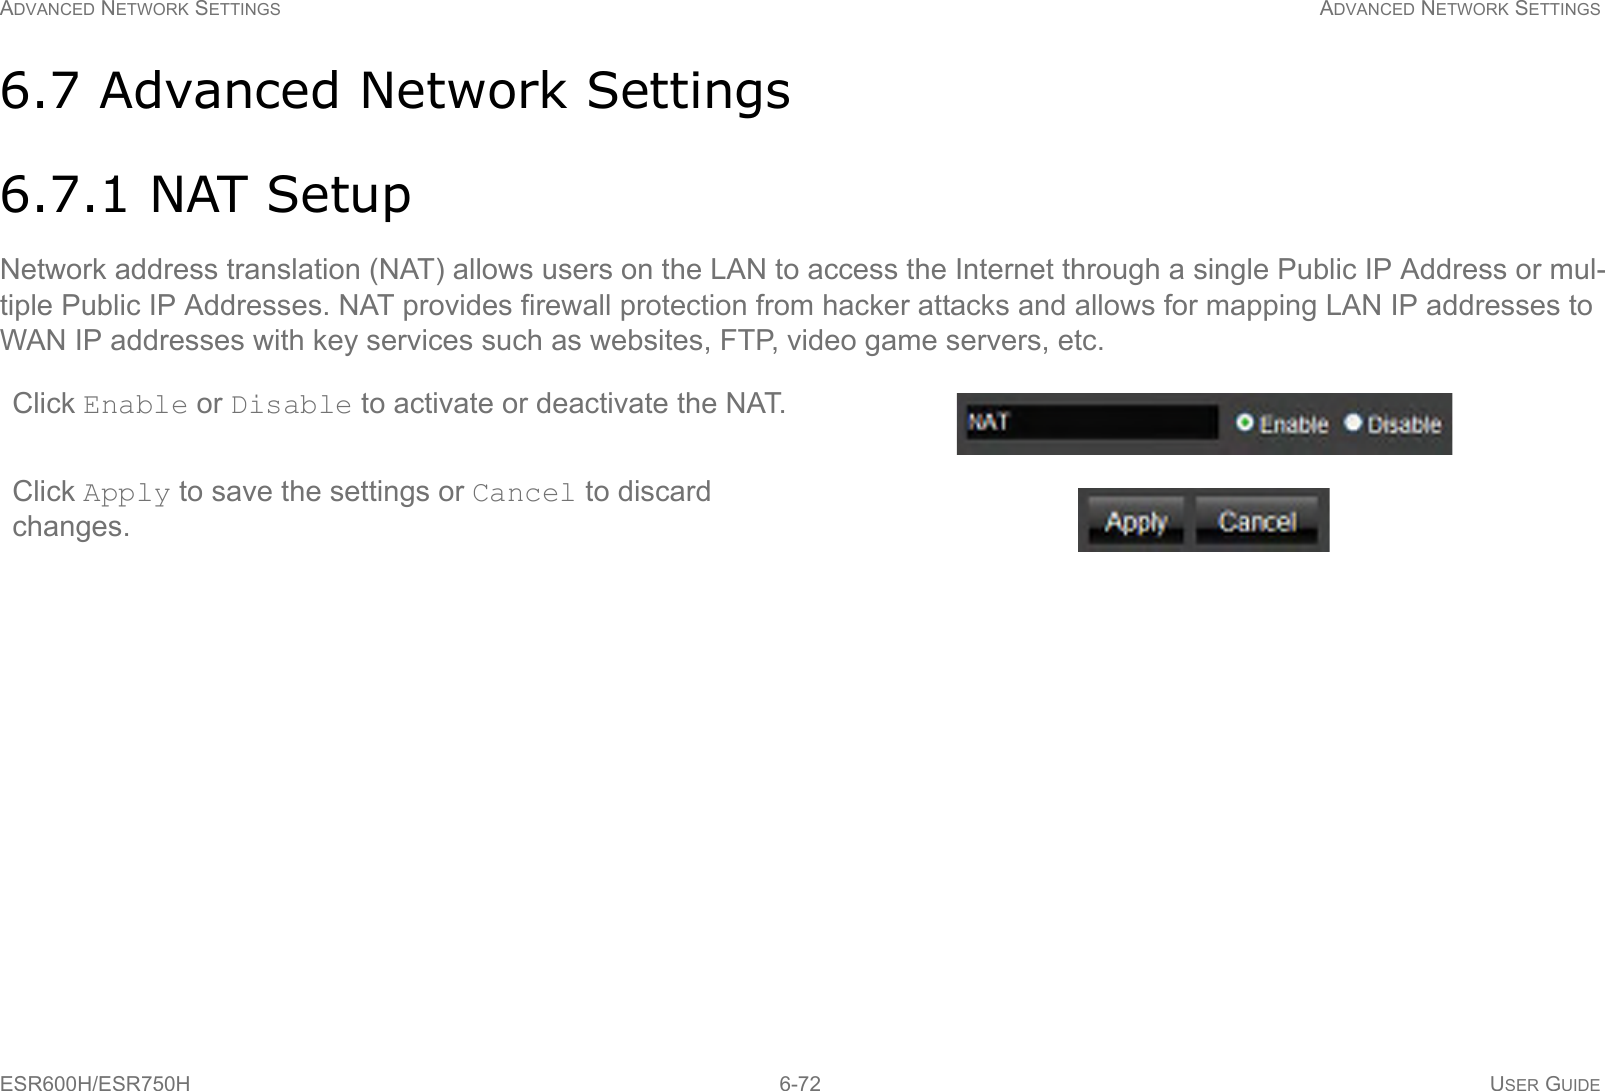 ADVANCED NETWORK SETTINGS ADVANCED NETWORK SETTINGSESR600H/ESR750H 6-72 USER GUIDE6.7 Advanced Network Settings6.7.1 NAT SetupNetwork address translation (NAT) allows users on the LAN to access the Internet through a single Public IP Address or mul-tiple Public IP Addresses. NAT provides firewall protection from hacker attacks and allows for mapping LAN IP addresses to WAN IP addresses with key services such as websites, FTP, video game servers, etc.Click Enable or Disable to activate or deactivate the NAT.Click Apply to save the settings or Cancel to discard changes.